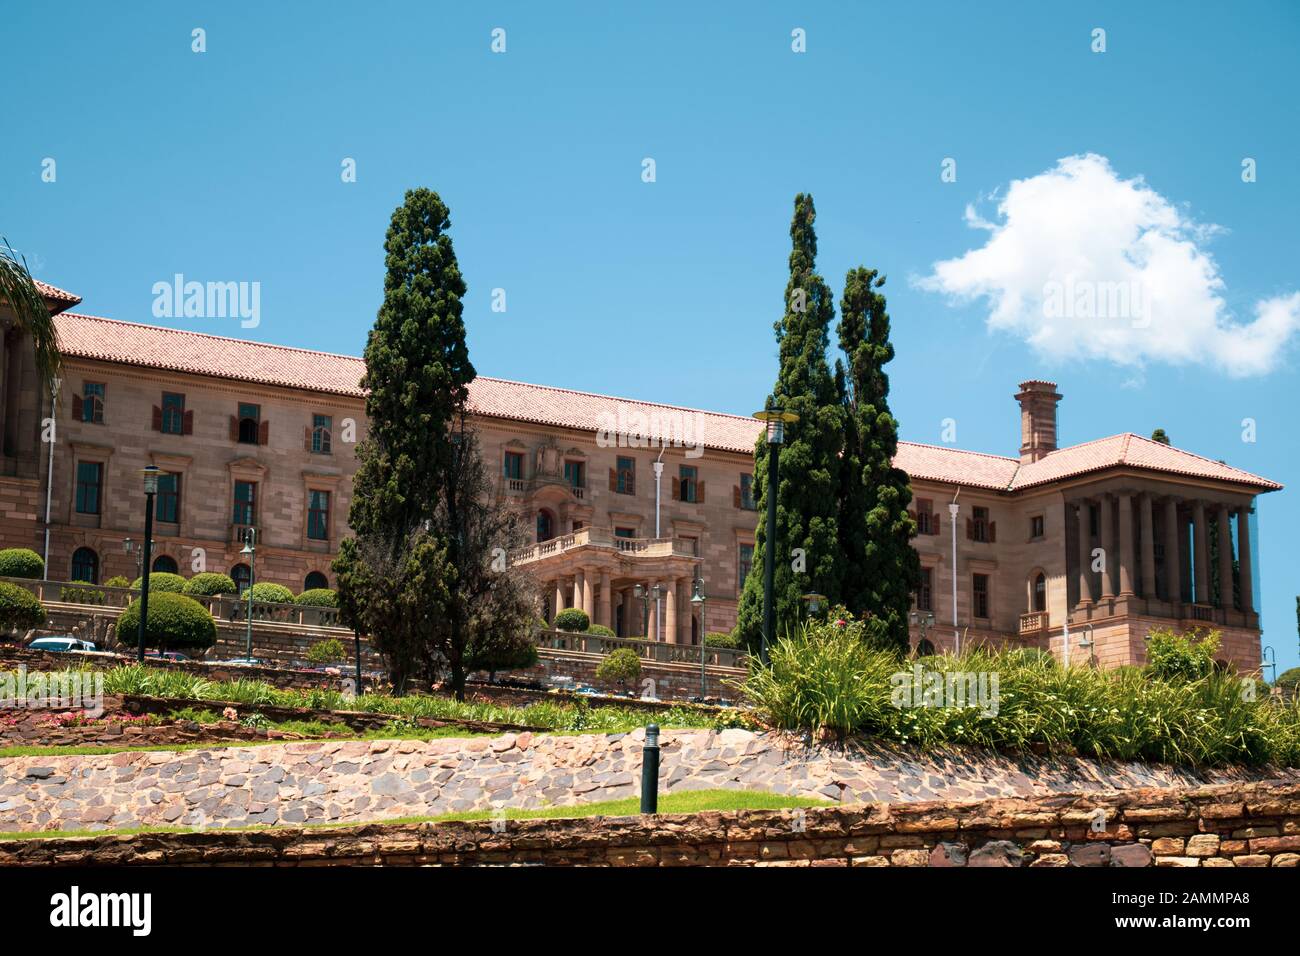 The Union Buildings in Pretoria, South Africa. Stock Photo